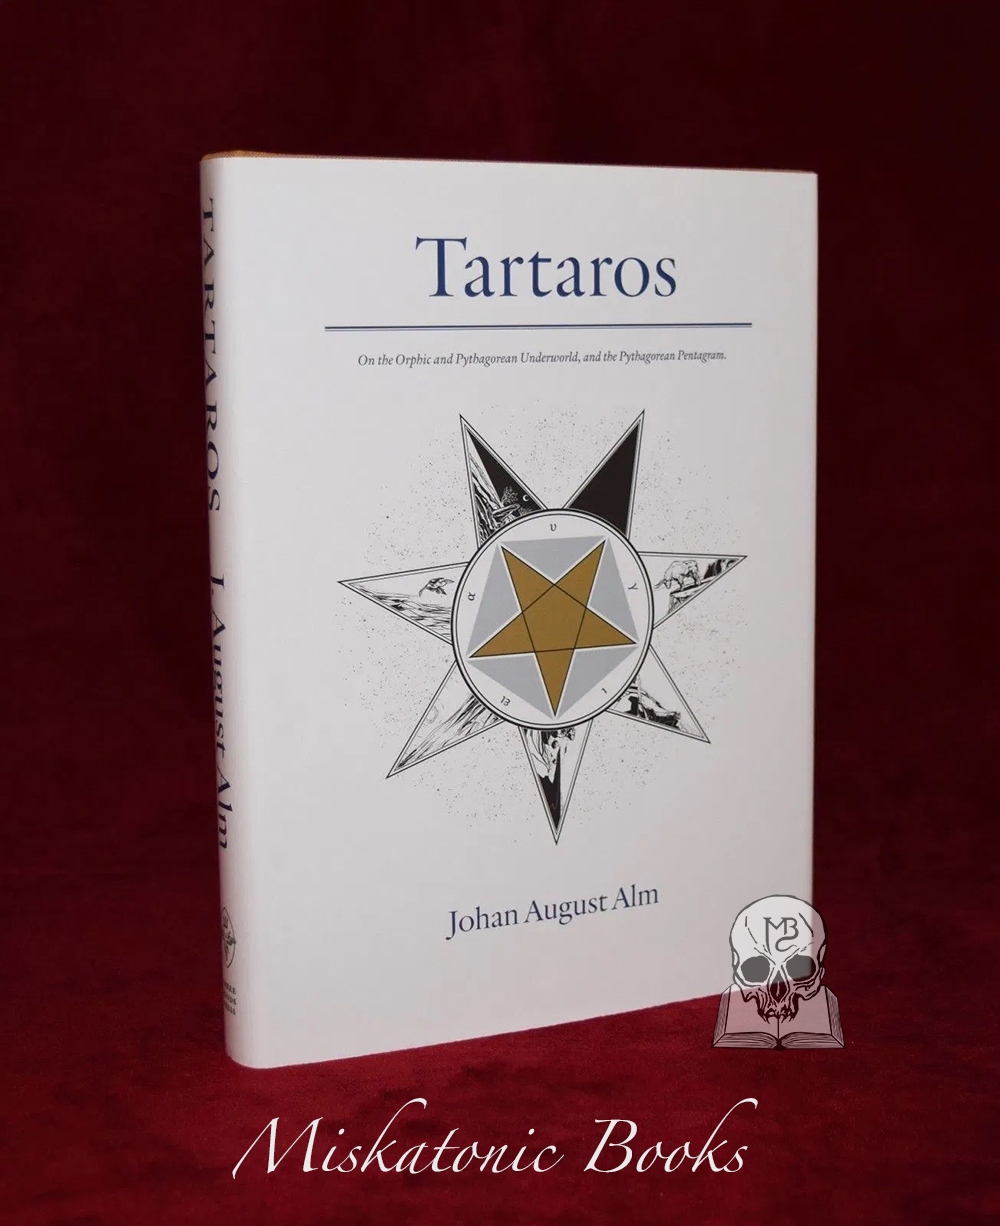 TARTAROS. On the Orphic and Pythagorean Underworld, and the Pythagorean Pentagram by Johan August Alm (Standard Hardcover Limited Edition)